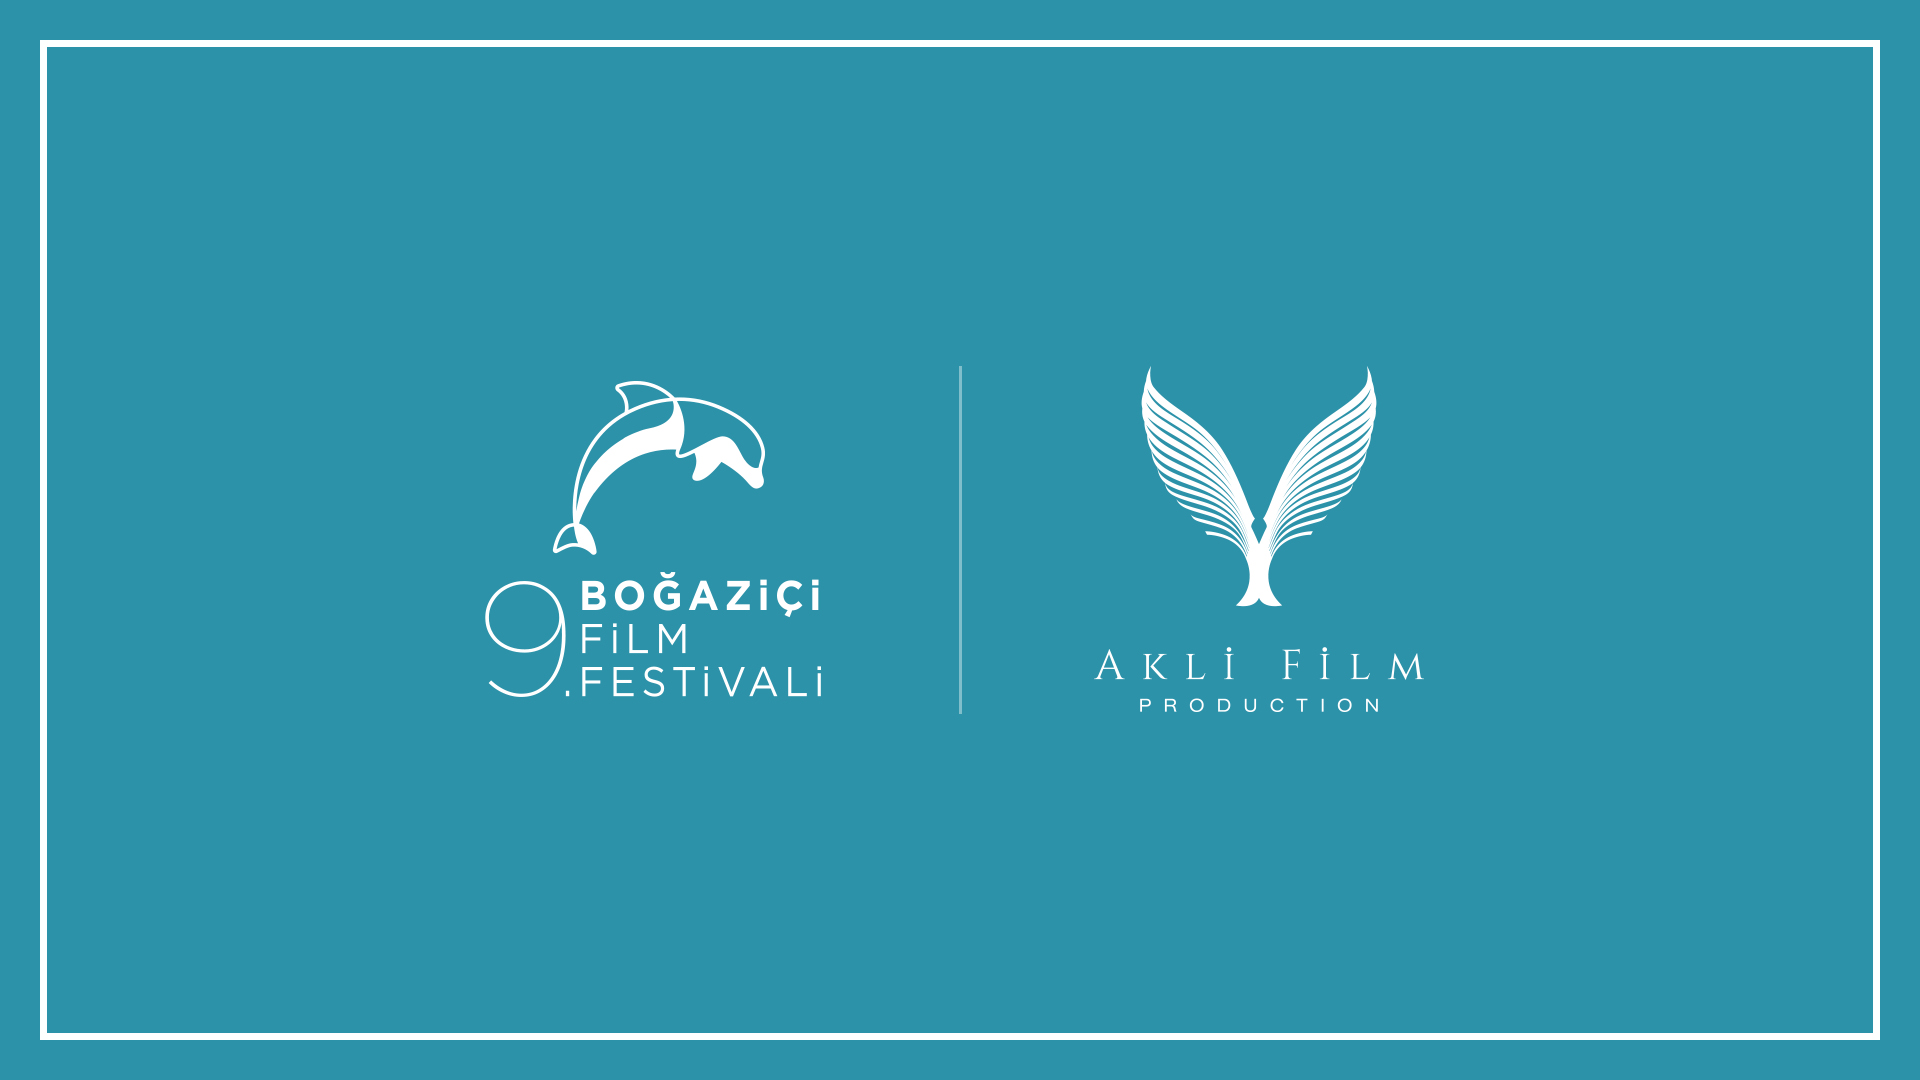 9th Bosphorus Film Festival Now Has the Best Debut Award for National Feature Film Competition Category